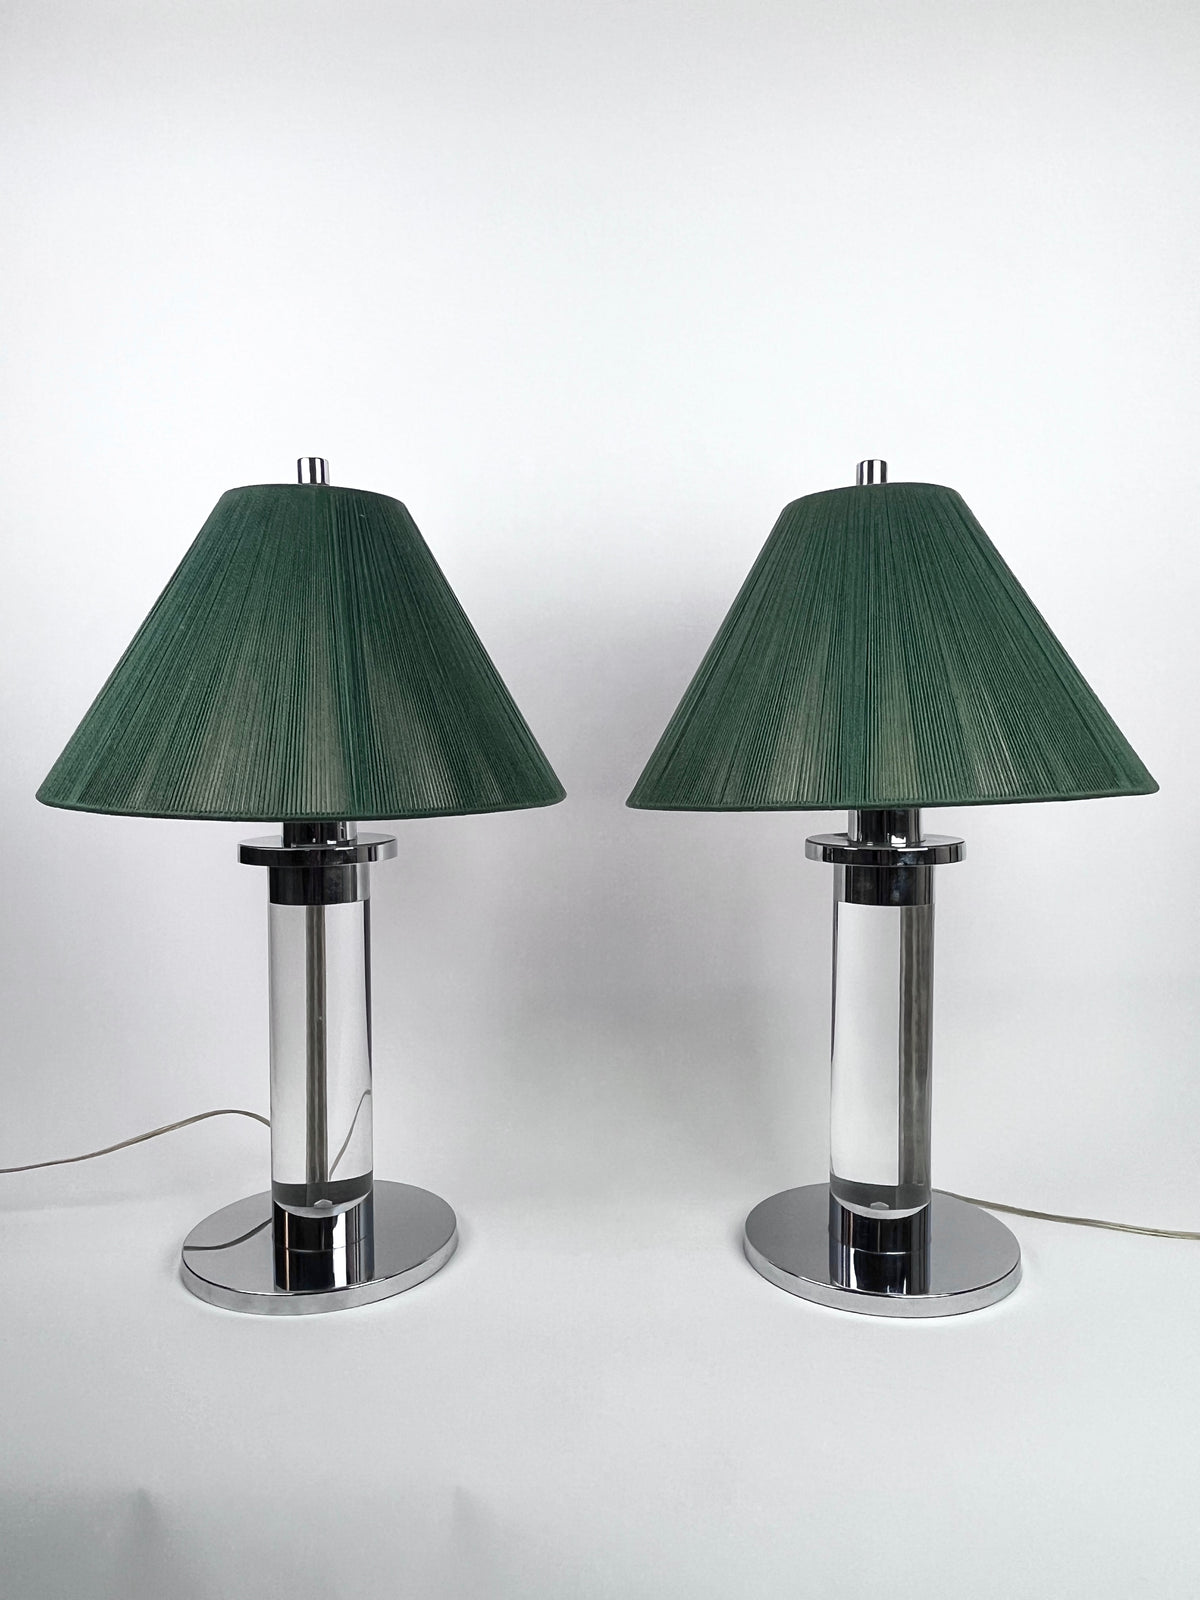 Vintage Lucite & Chrome Lamps with Shades by Frederick Cooper Chicago, A Pair